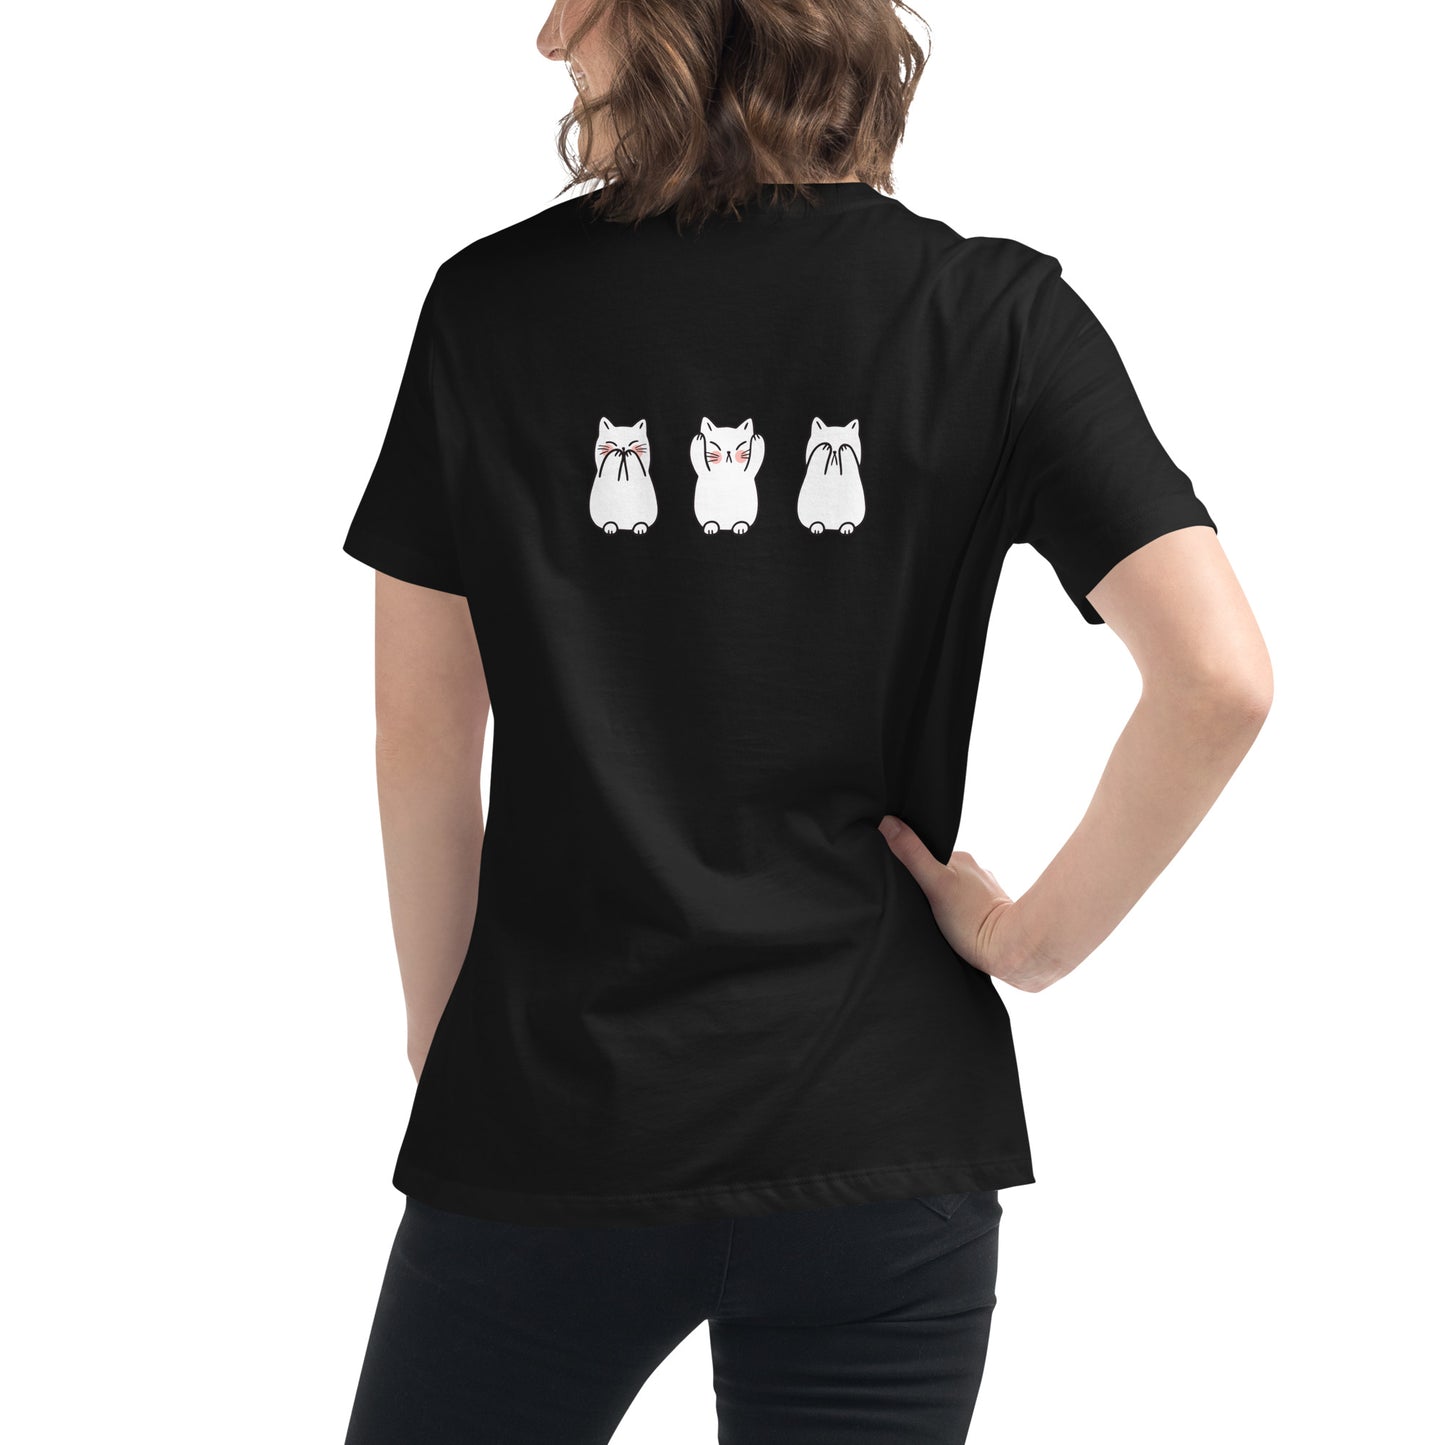 Comfy T-shirts Angry Cat